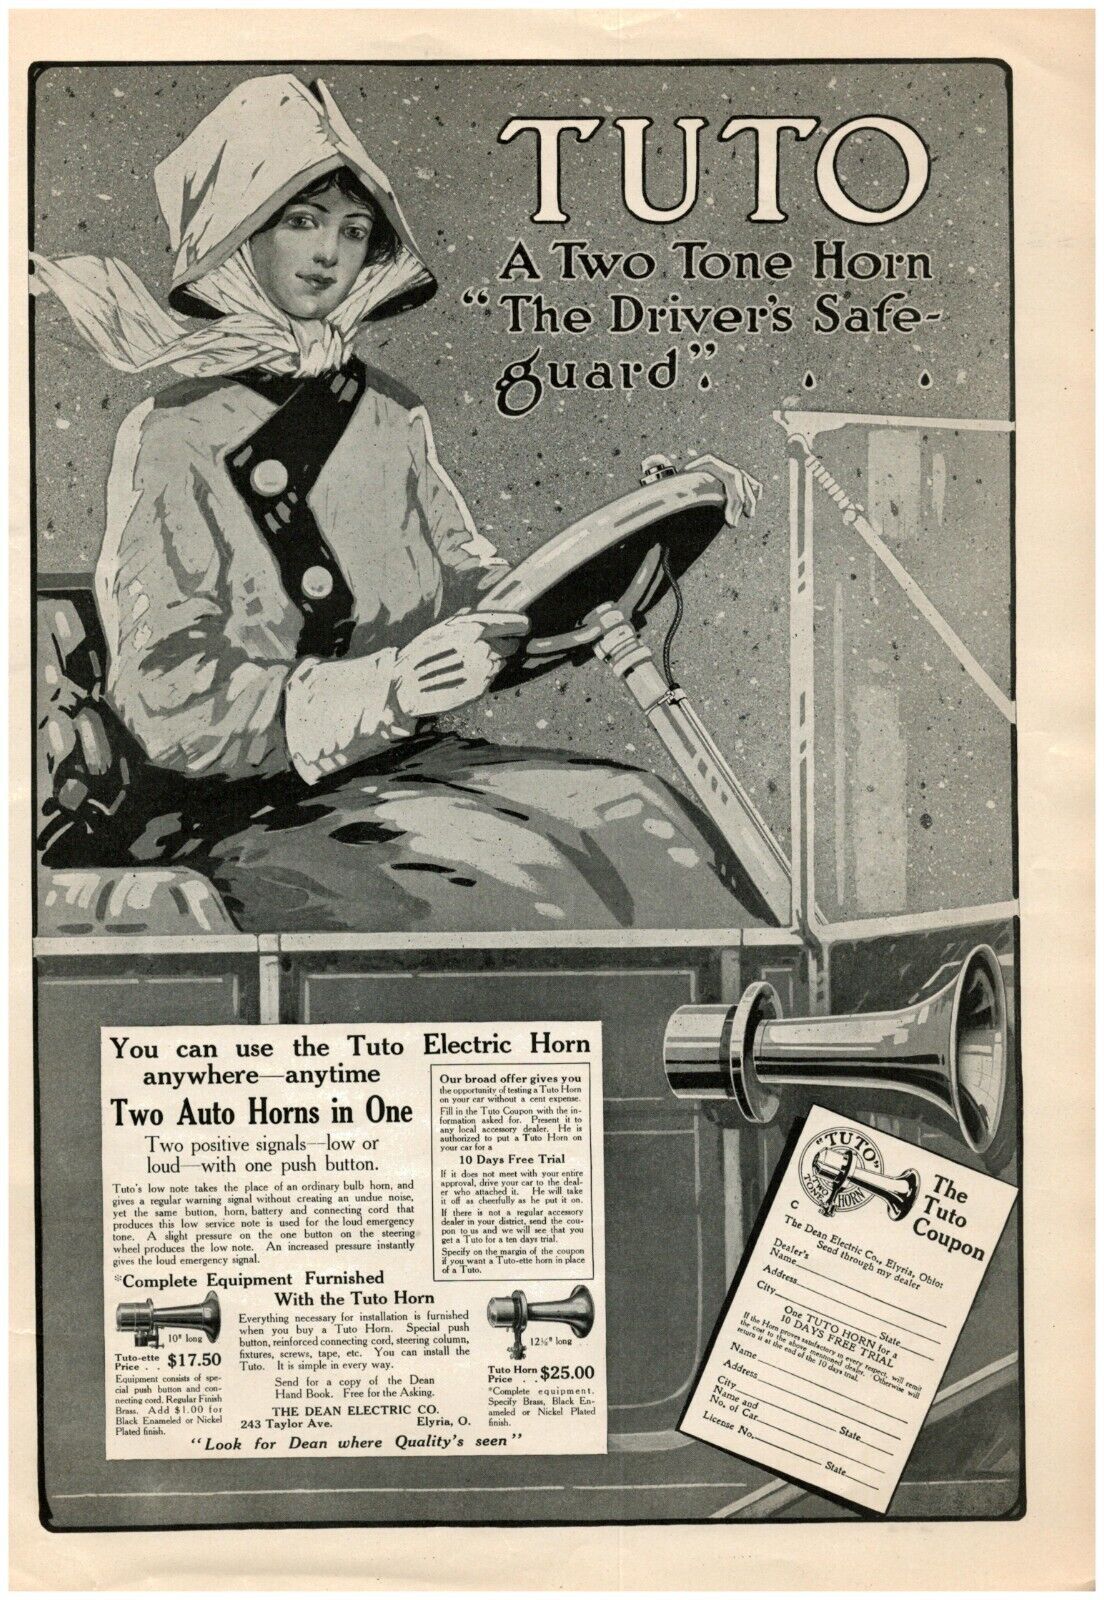 1912 TUTO Antique Print Ad Dean Electric Two Tone Horn Drivers Safeguard Coupon